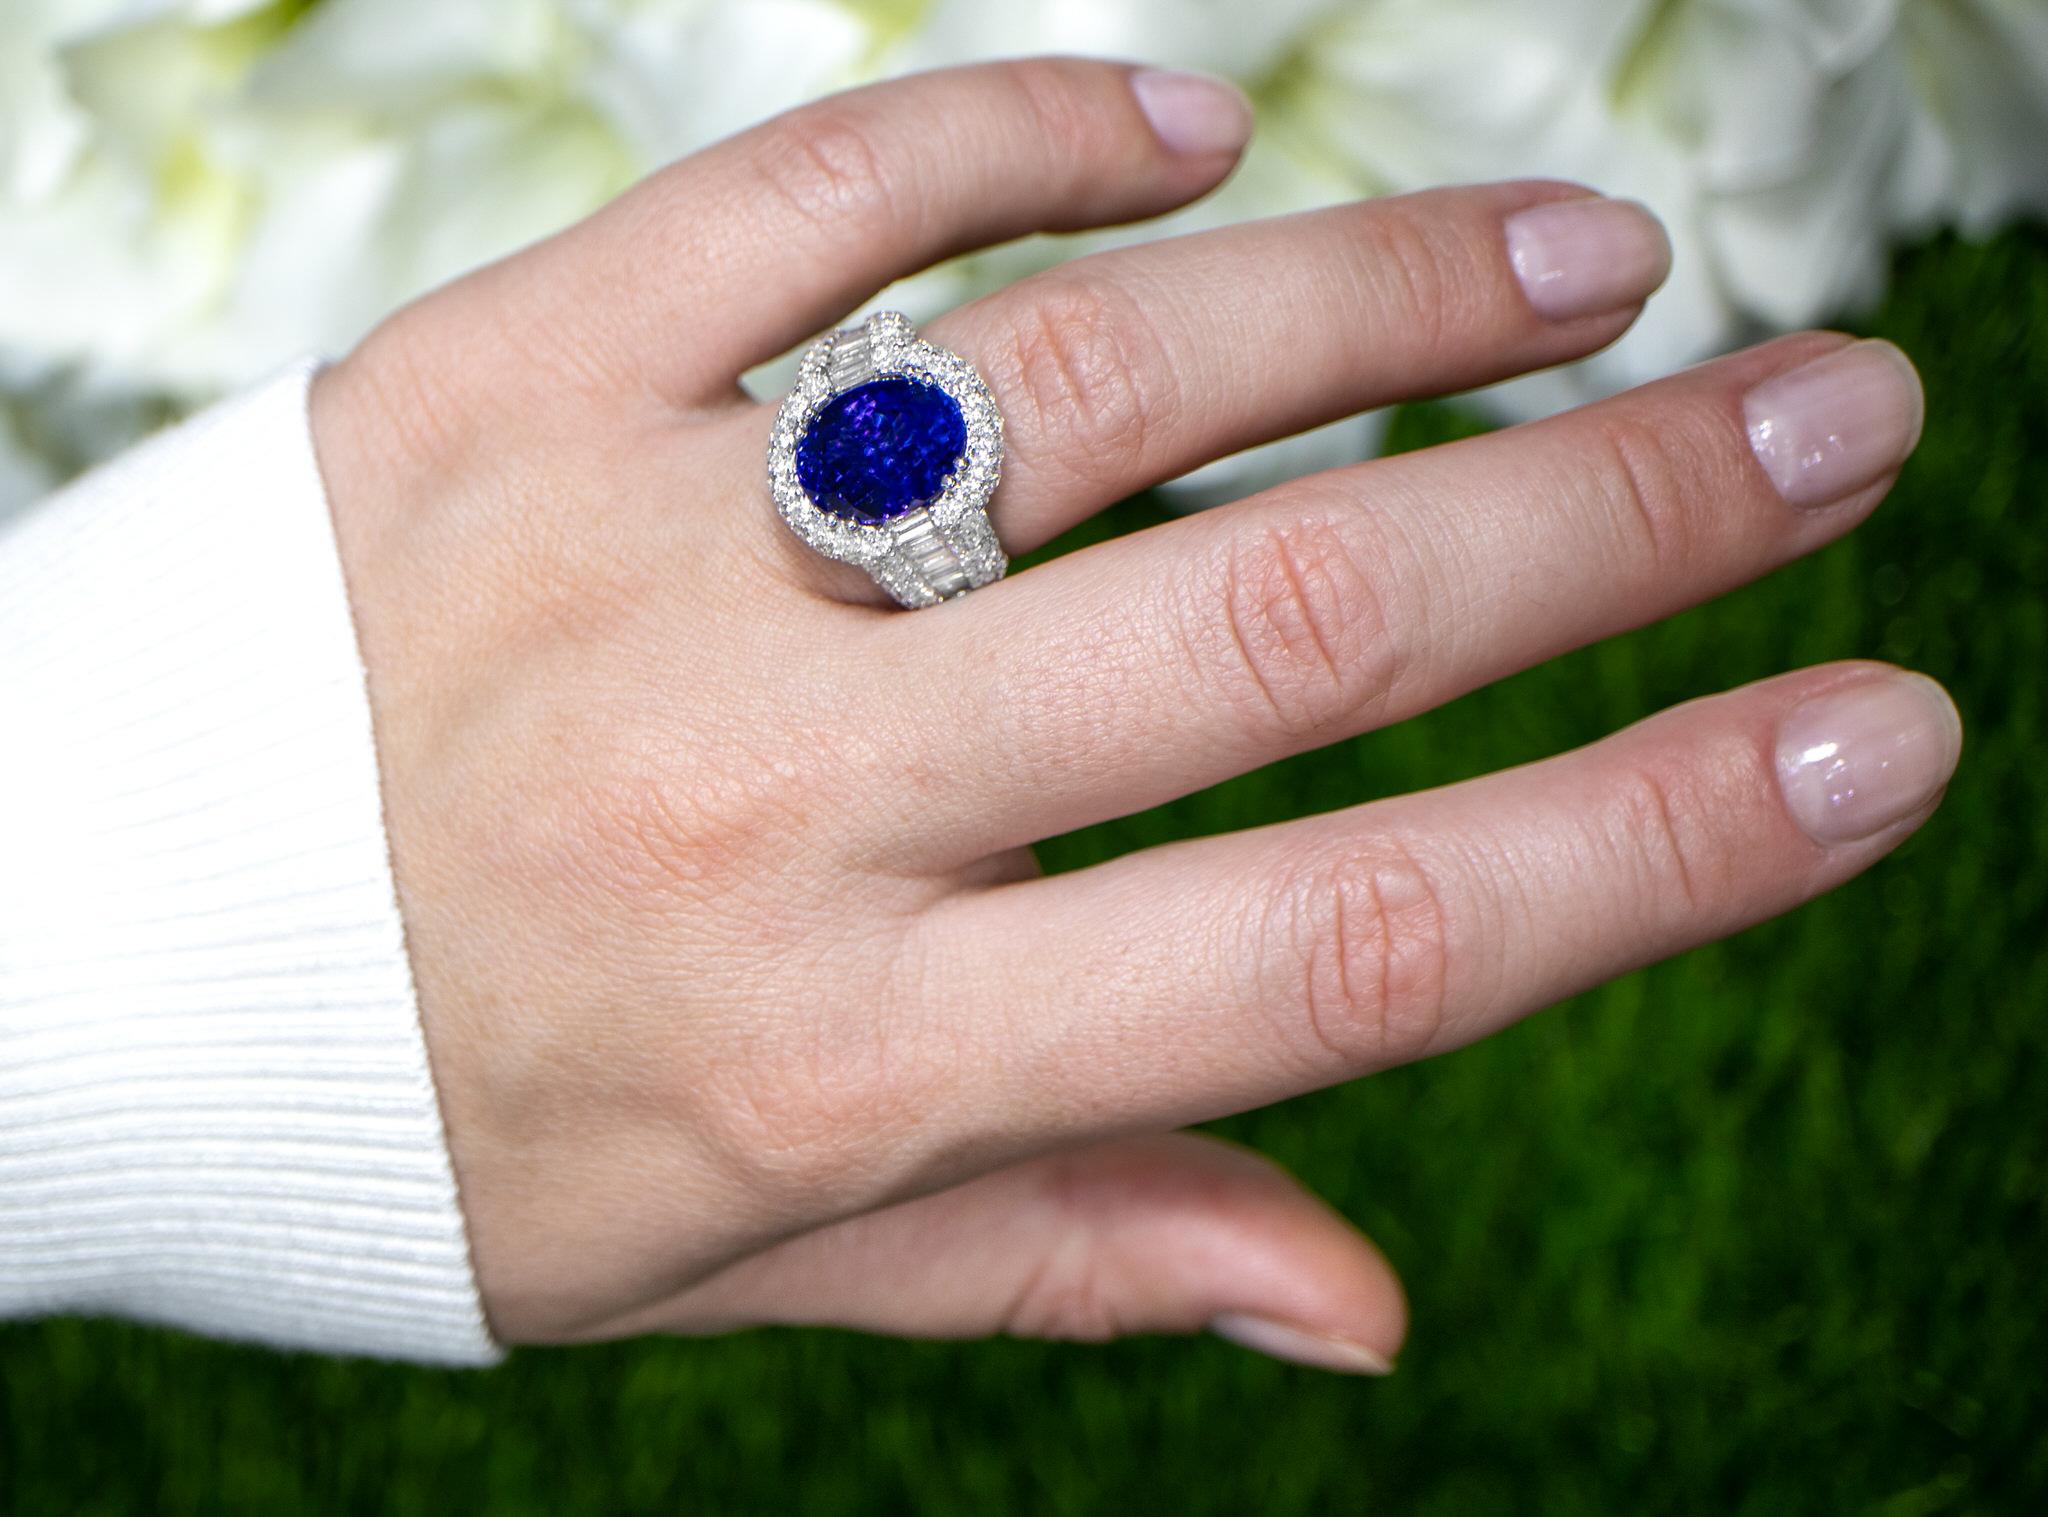 Tanzanite Statement Ring Diamond Setting 7.49 Carats 18K Gold In Excellent Condition For Sale In Laguna Niguel, CA